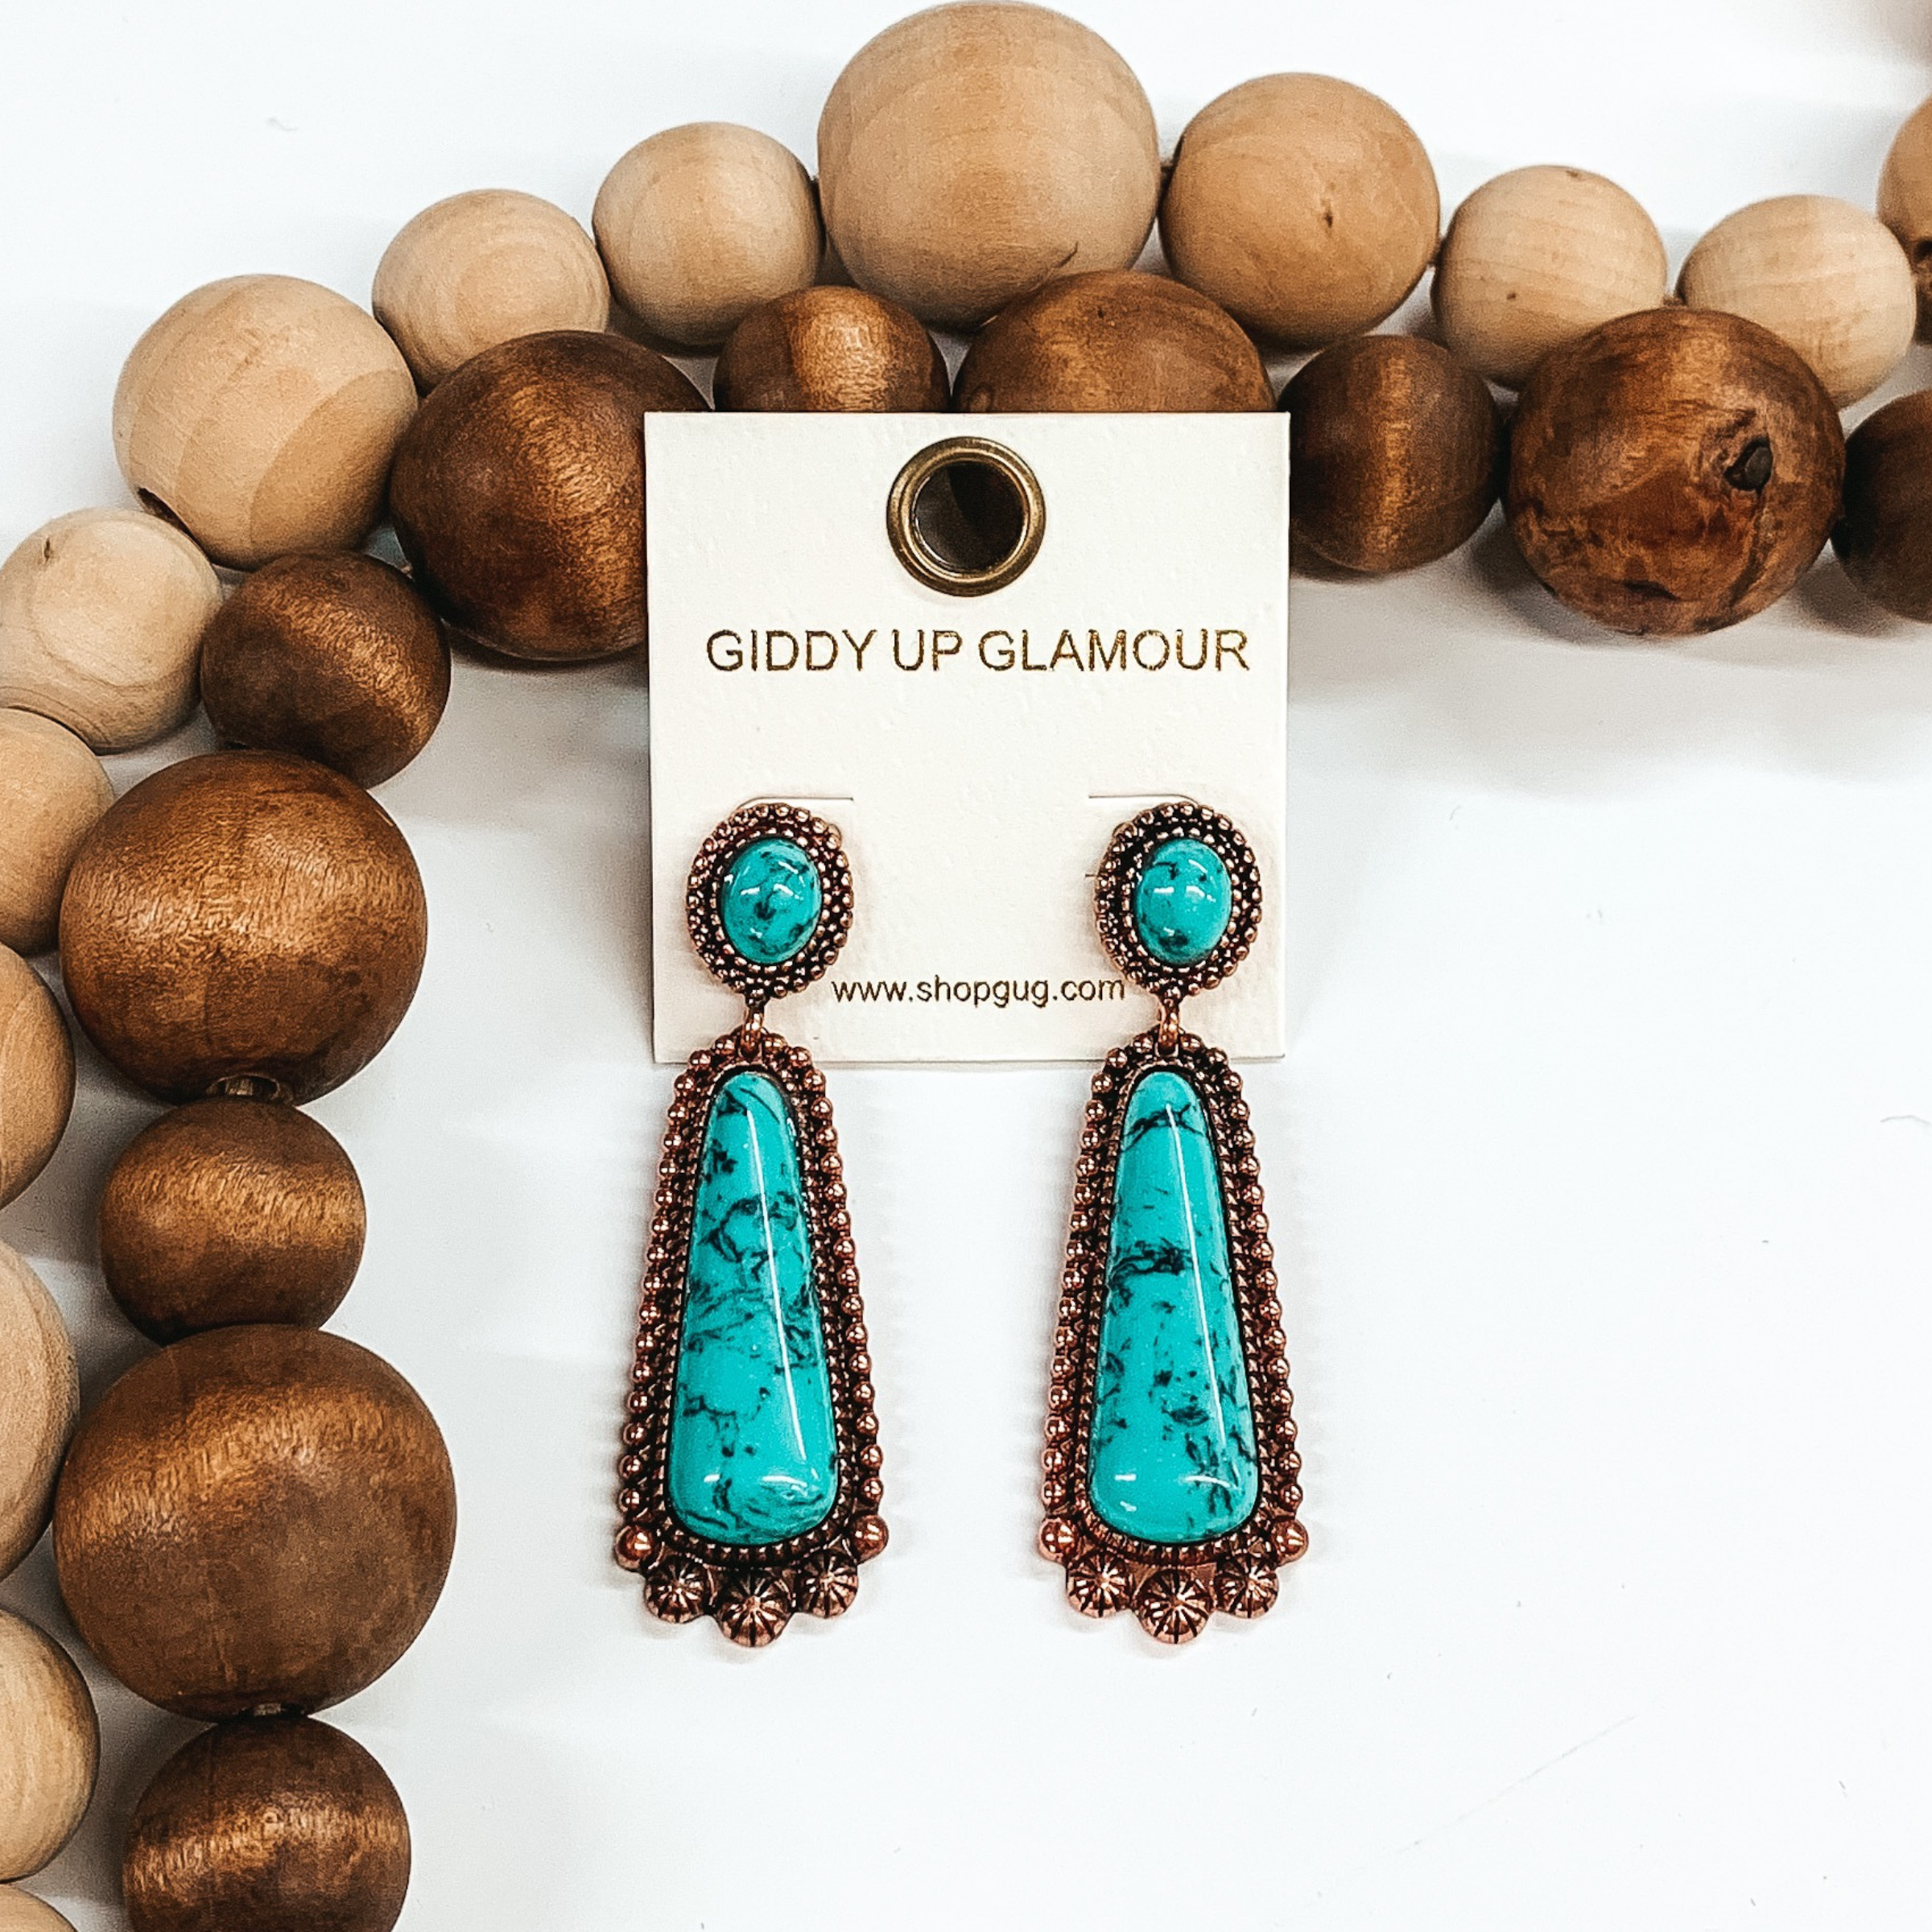 These earrings are copper and include an oval turquoise stud with a turquoise drop stone in a rounded triangle shape. These earrings are pictured on a white that has tan and brown beads on it.